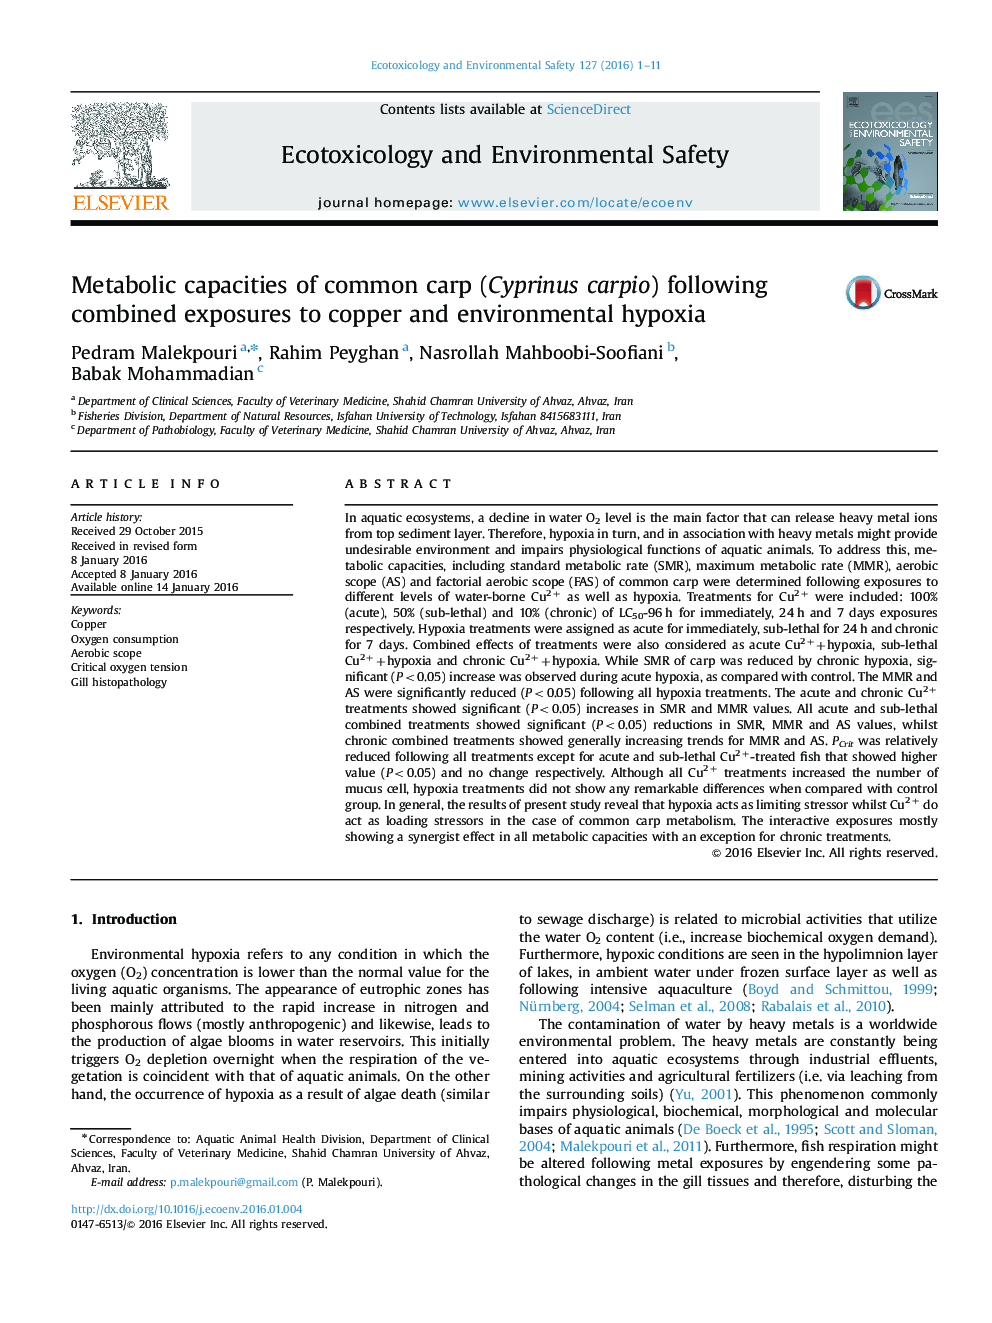 Metabolic capacities of common carp (Cyprinus carpio) following combined exposures to copper and environmental hypoxia